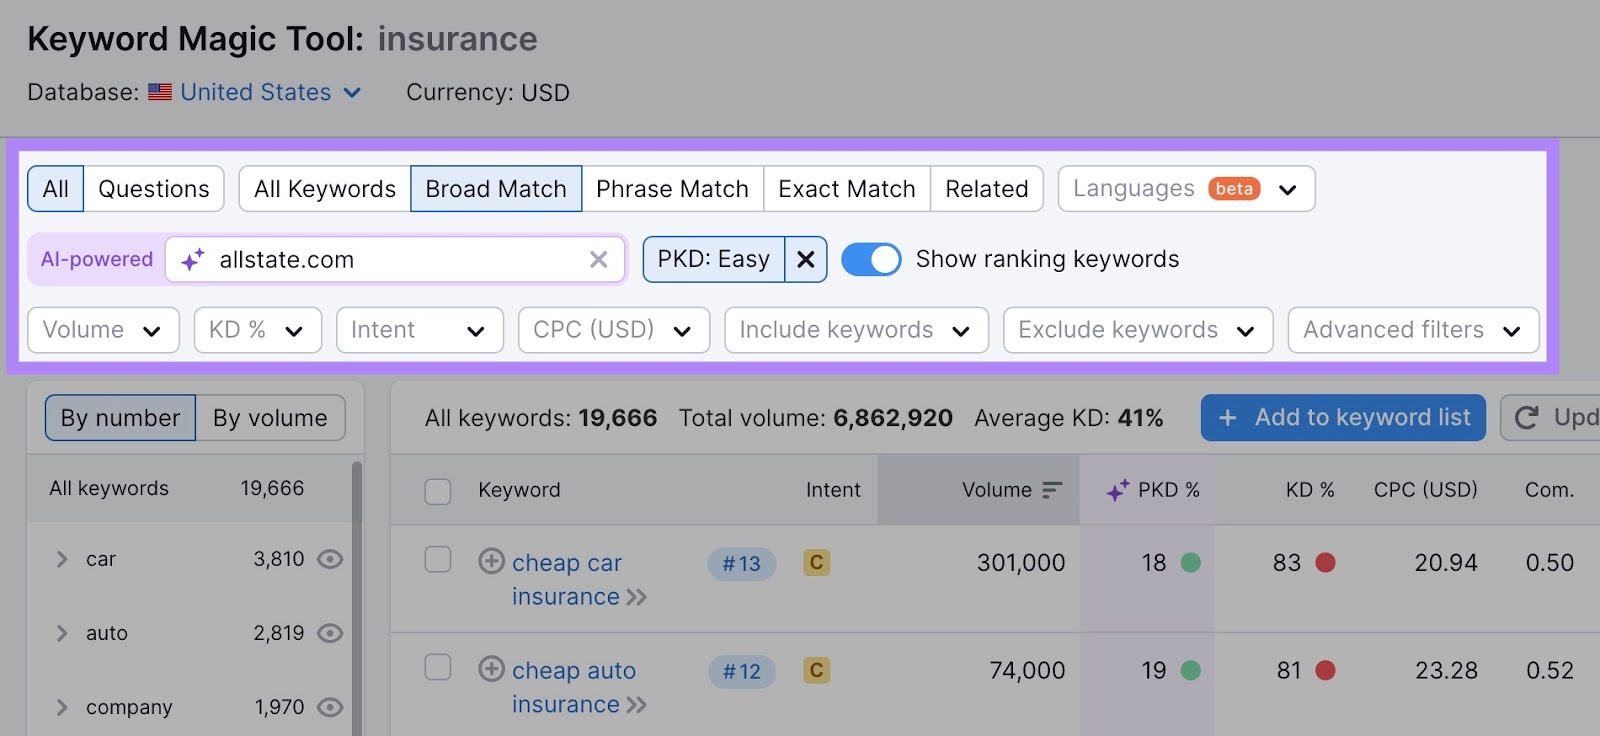 Filters on Keyword Magic Tool including questions, match type, languages, volume, intent, etc. highlighted.